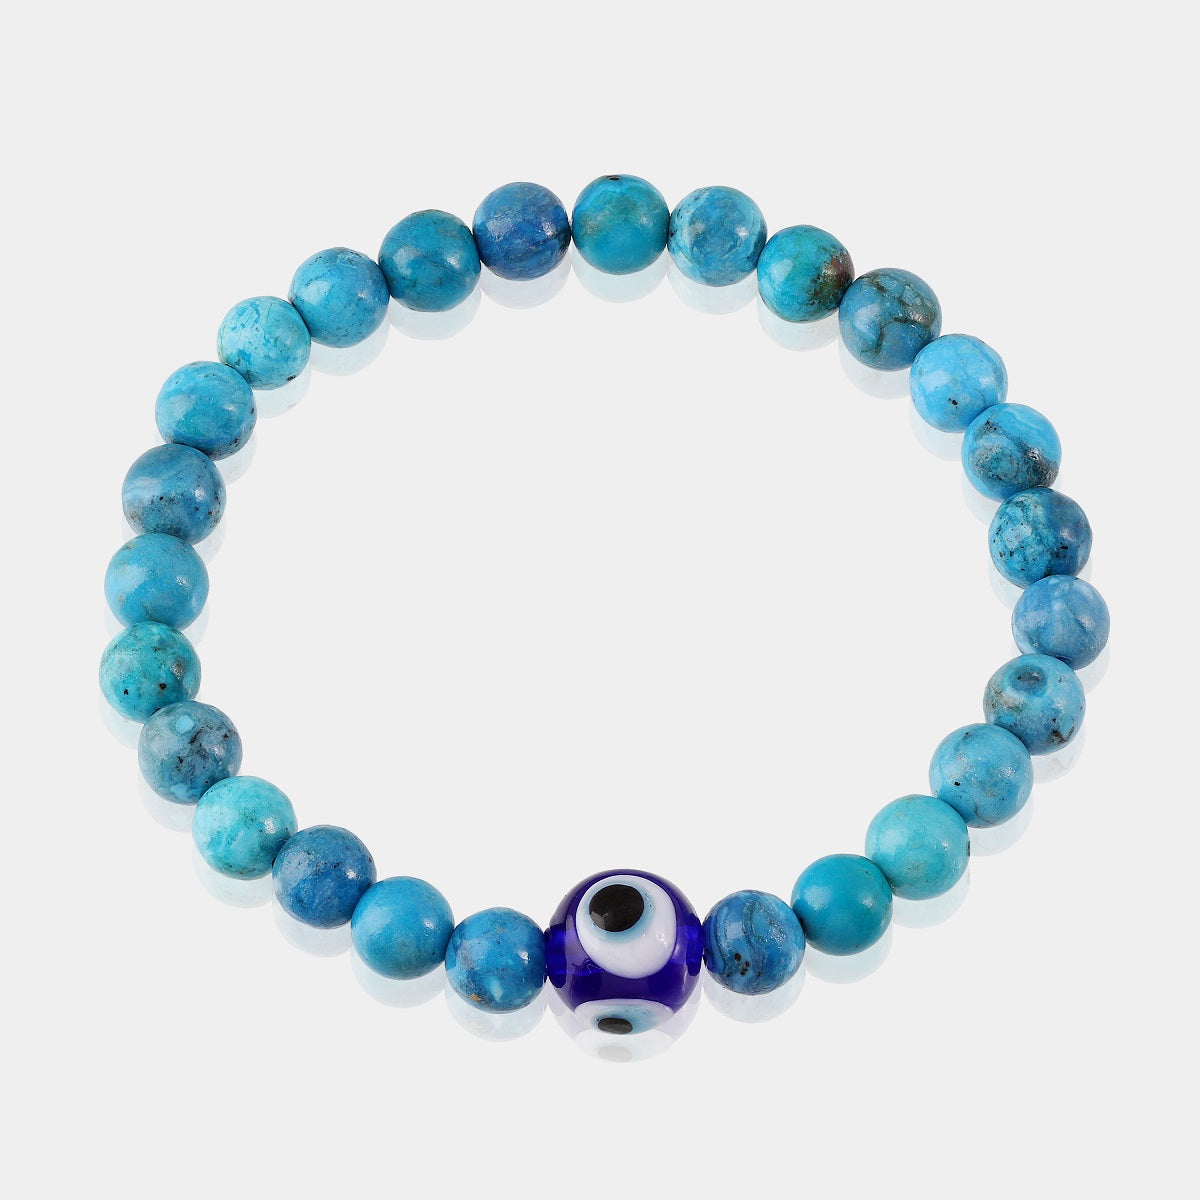 An intricate bead with the Evil Eye symbol, believed to ward off negativity and provide a shield of protection, on a gemstone bracelet.